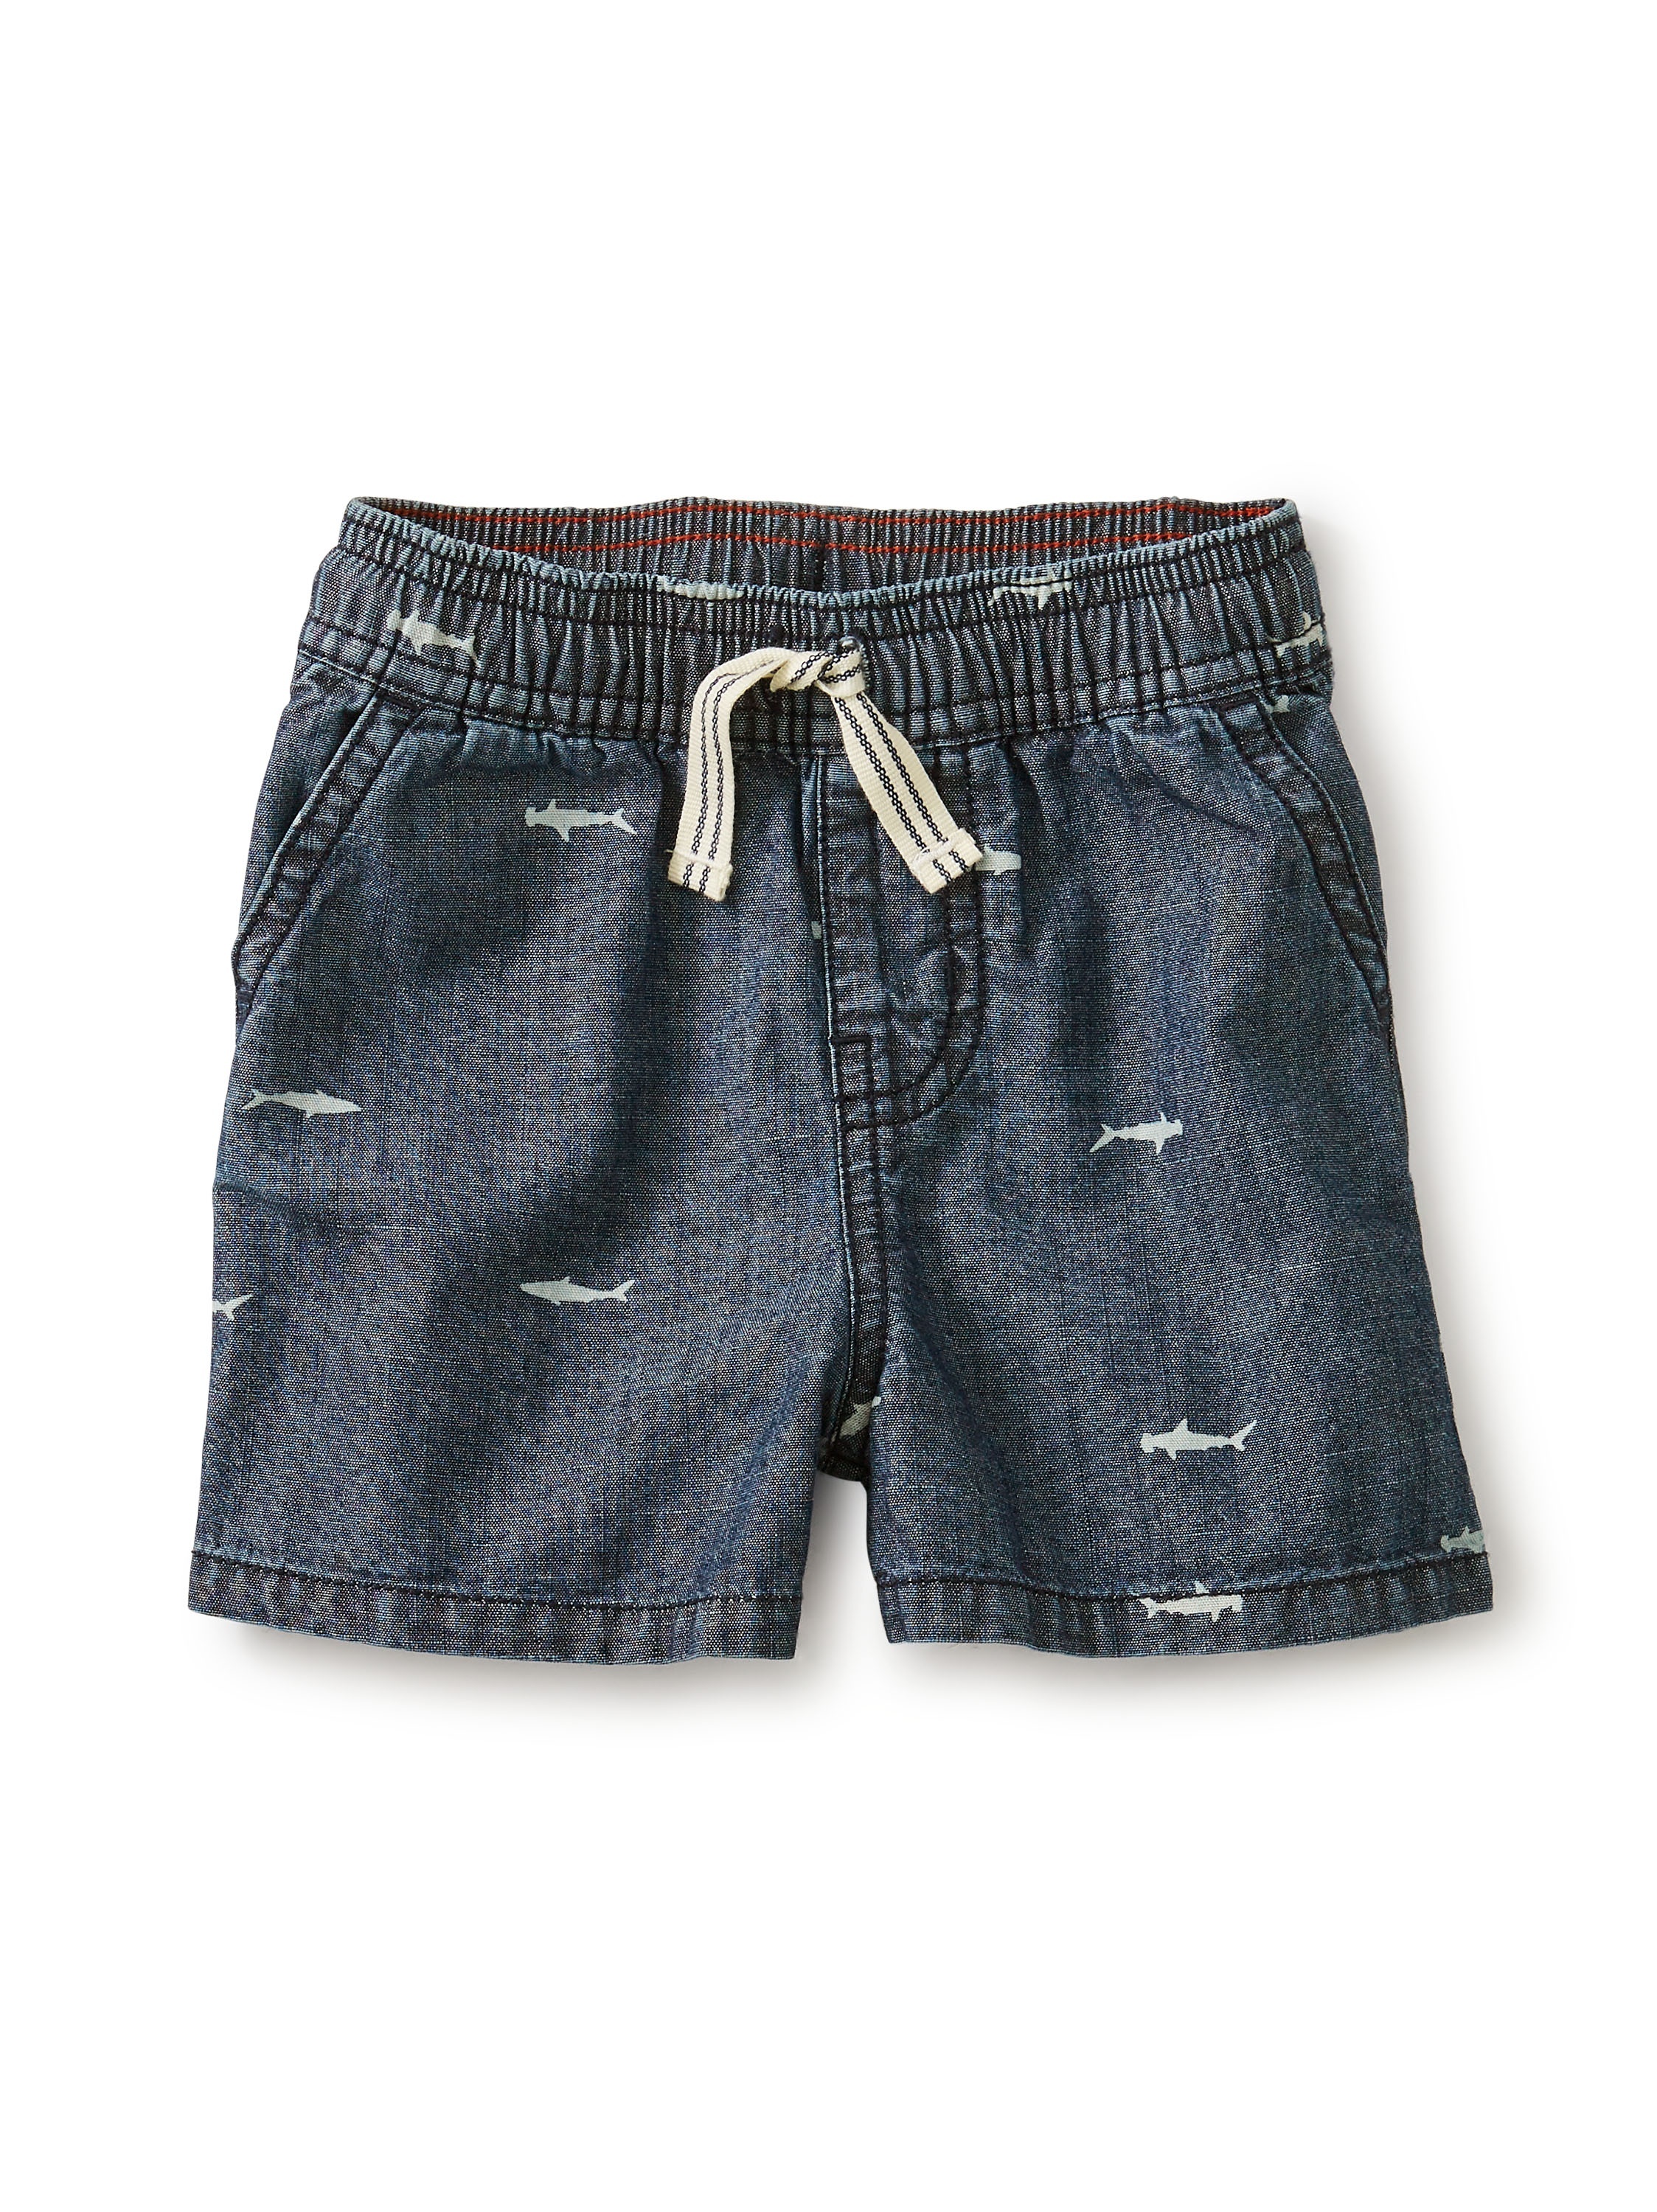 Chambray Discovery Shorts | Tea Collection